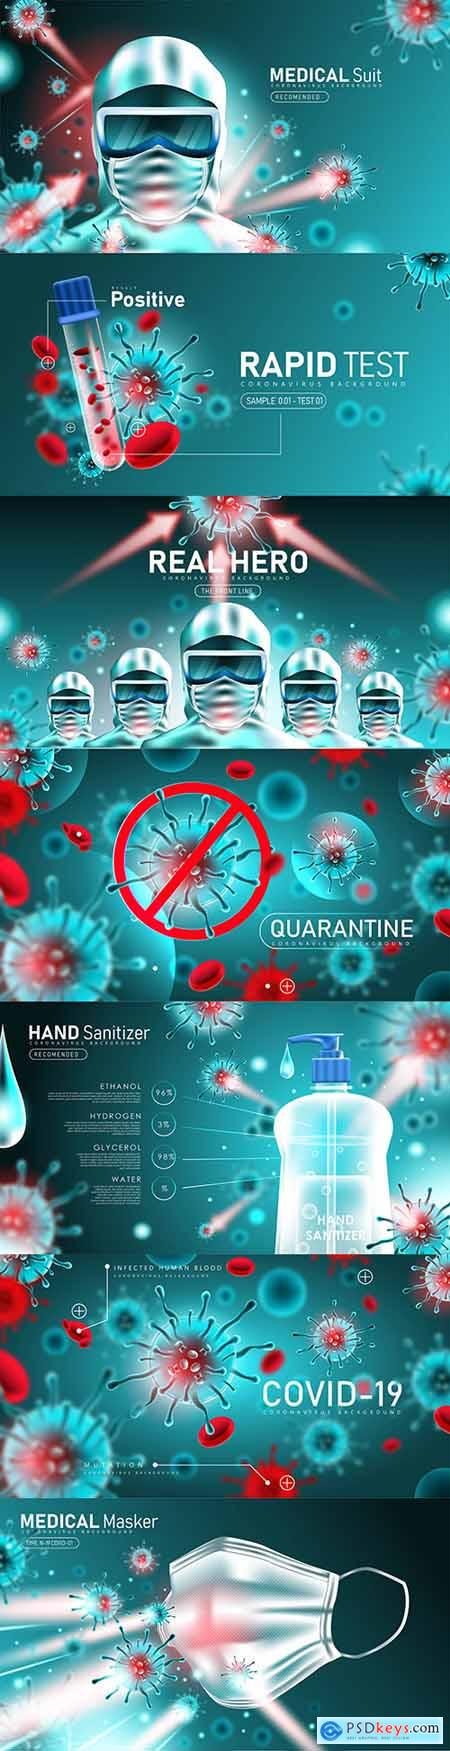 Hand disinfection and coronavirus protective clothing